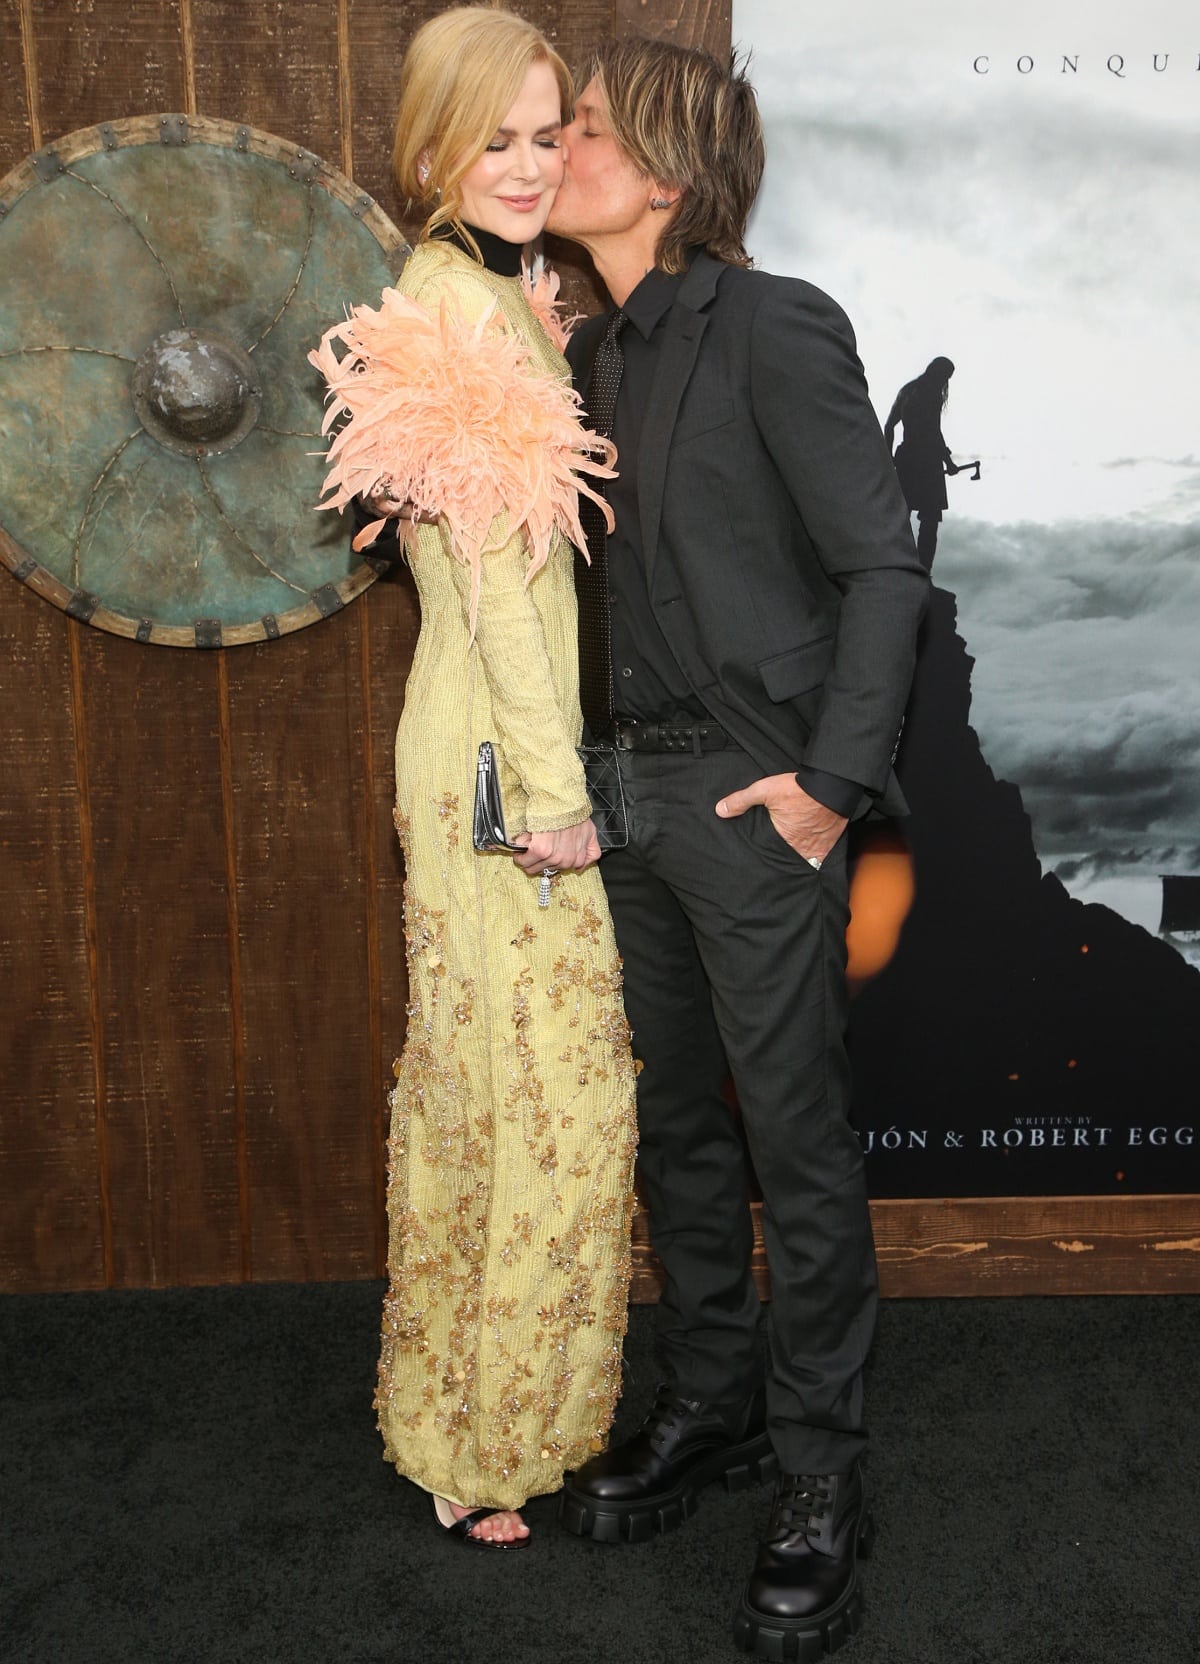 Keith Urban, who is an inch shorter than Nicole Kidman, is still smitten with his much taller wife after all these years